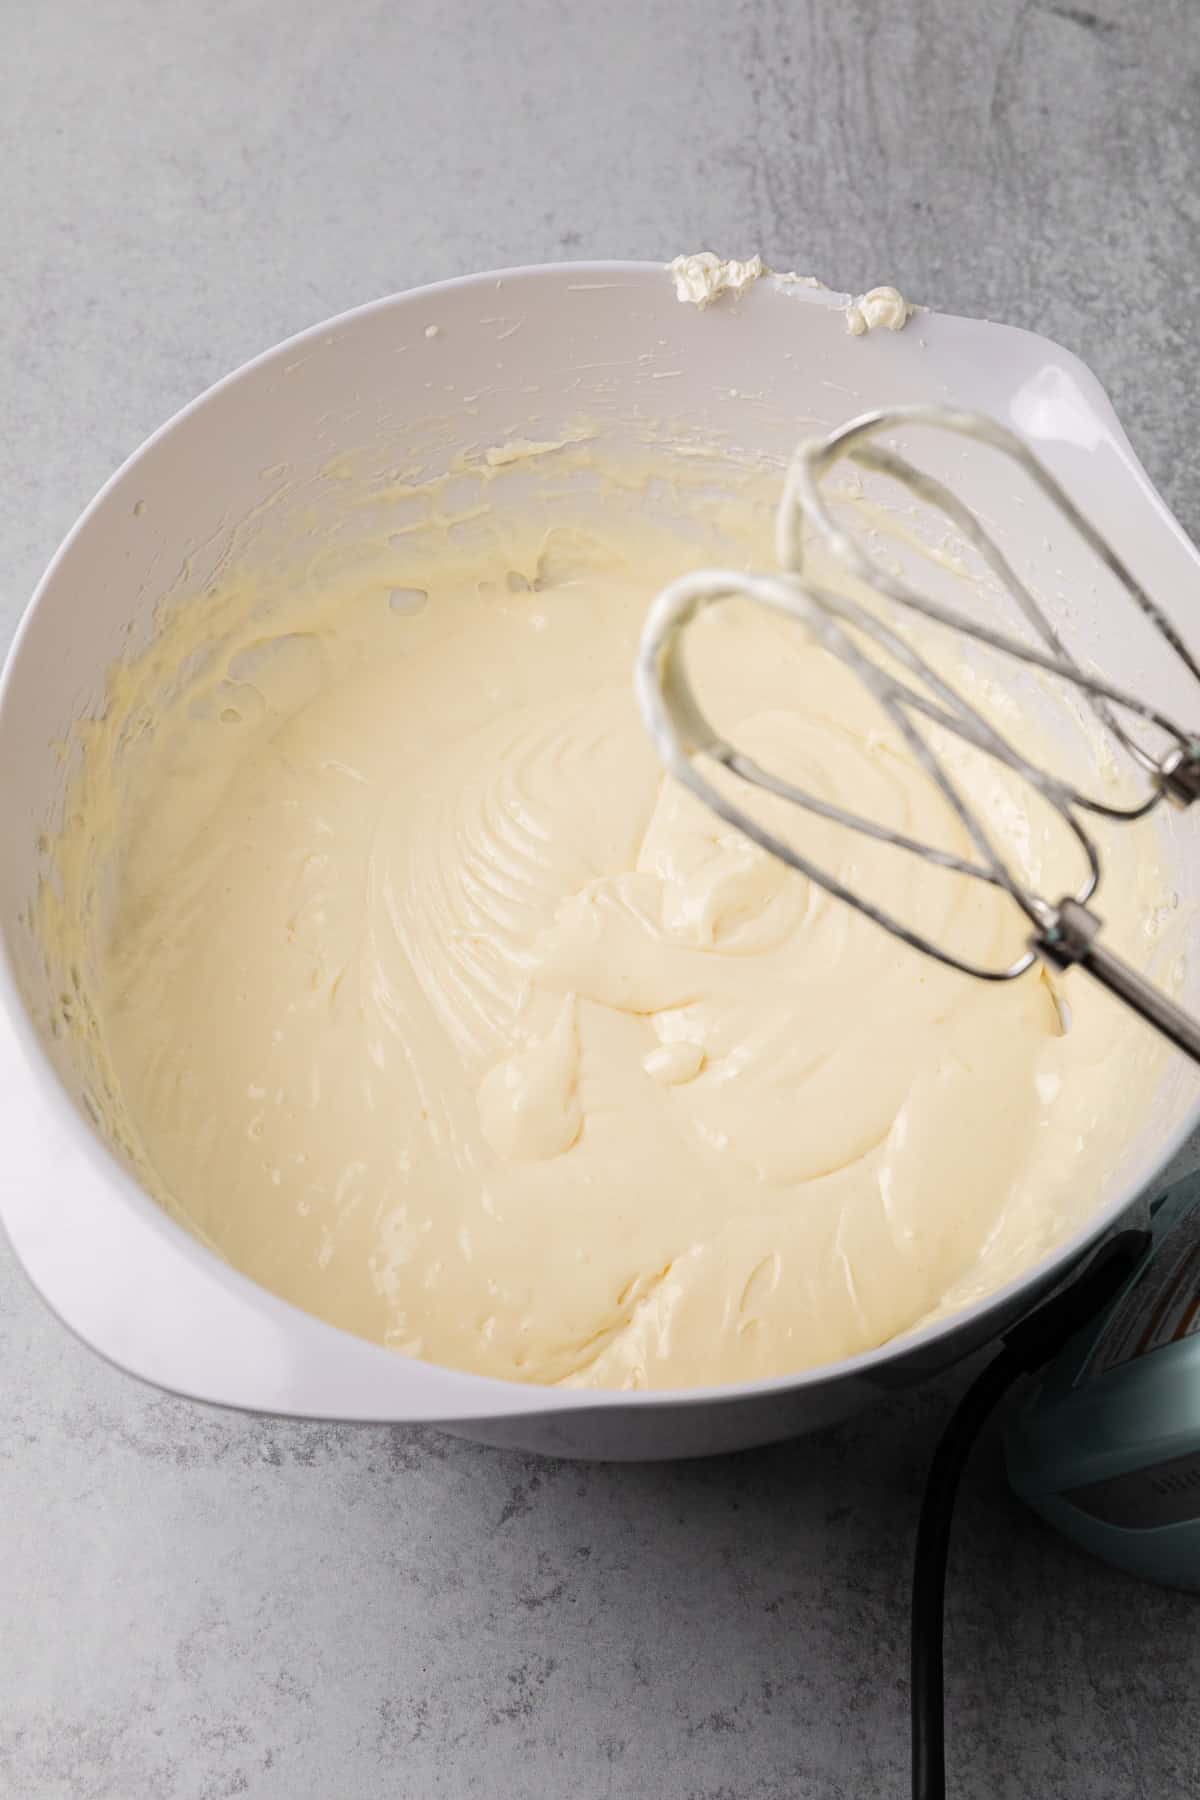 the batter in a bowl after mixing